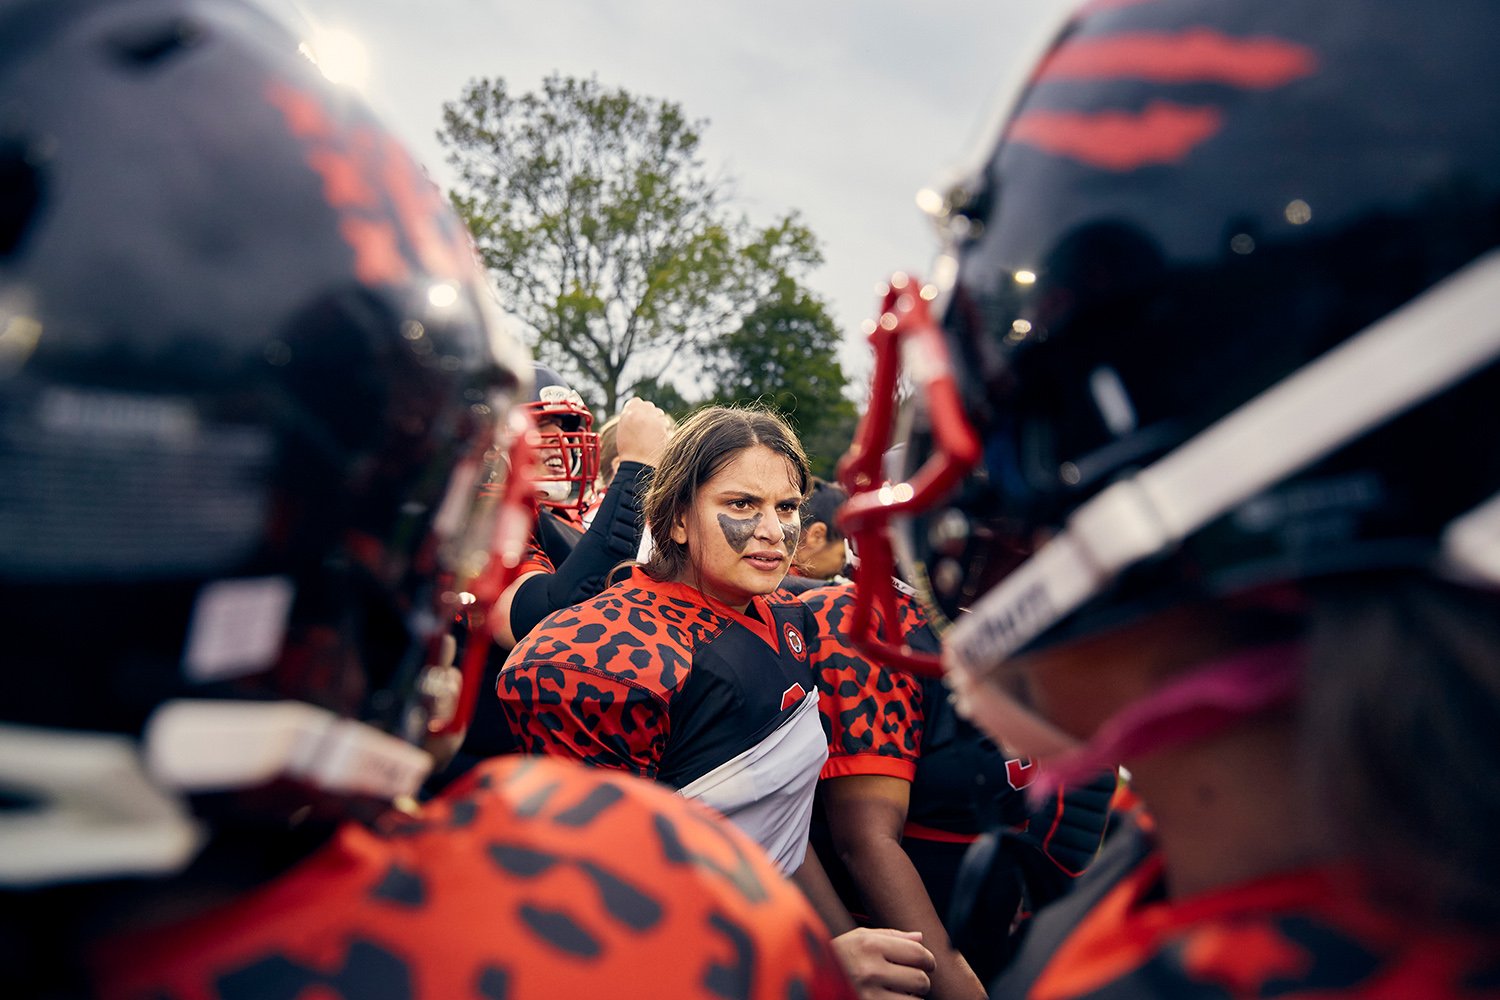  Kelly, quarterback for the Amsterdam Cats, gives her team a pre-game pep talk before facing off against the Rotterdam Ravens, Amsterdam, NL, on Sept. 27, 2020. This would be the only game of the season, which was canceled shortly afterward due to CO